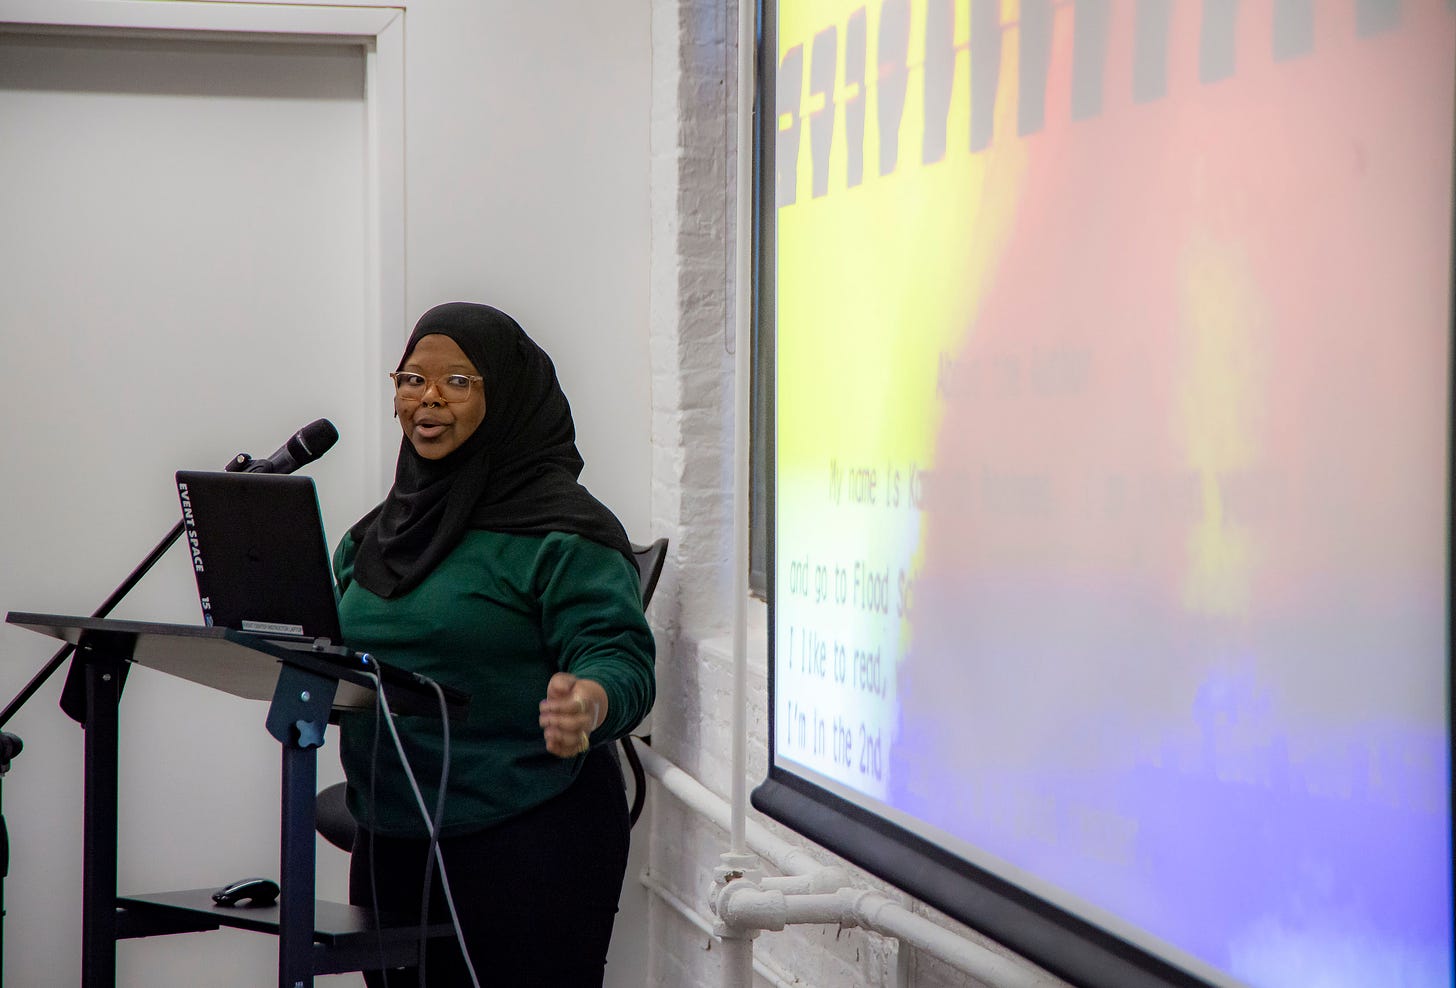 Artist Kameelah Janan Rasheed talked about her artistic work with the libraries. Photo: Aidan Smith.